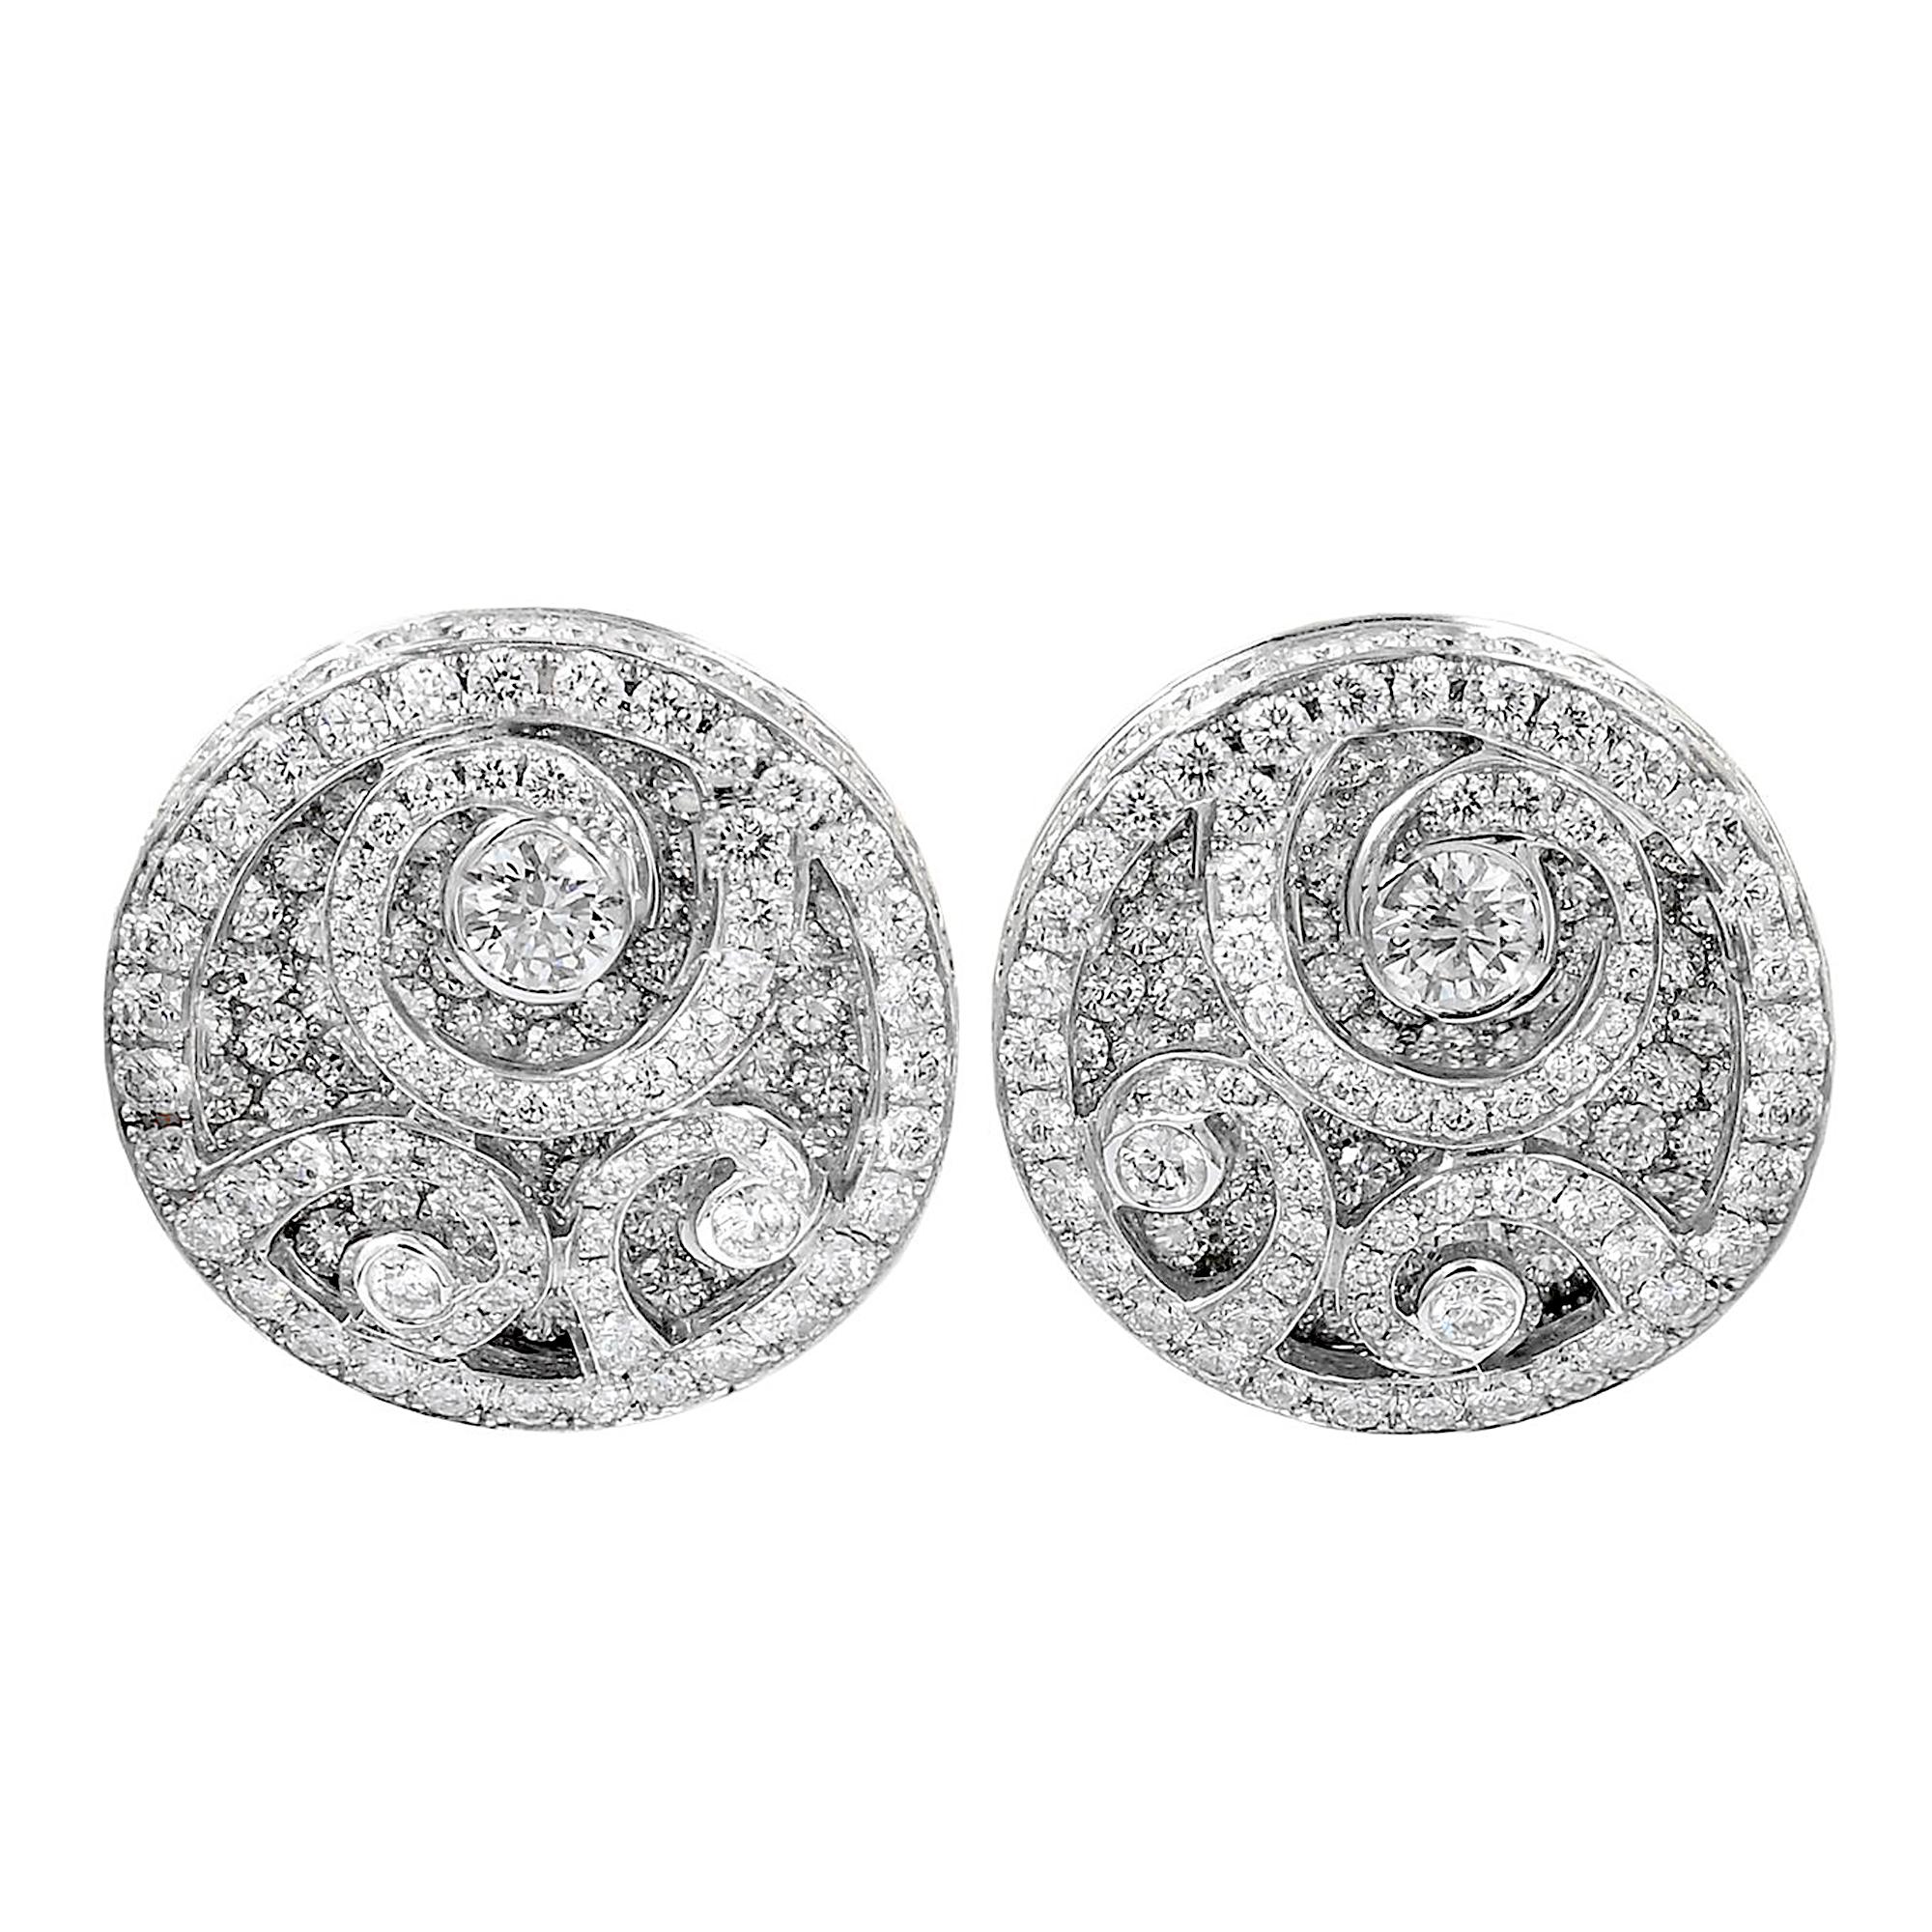 Graff Diamond On Diamond White Gold Earrings In Excellent Condition For Sale In Feasterville, PA